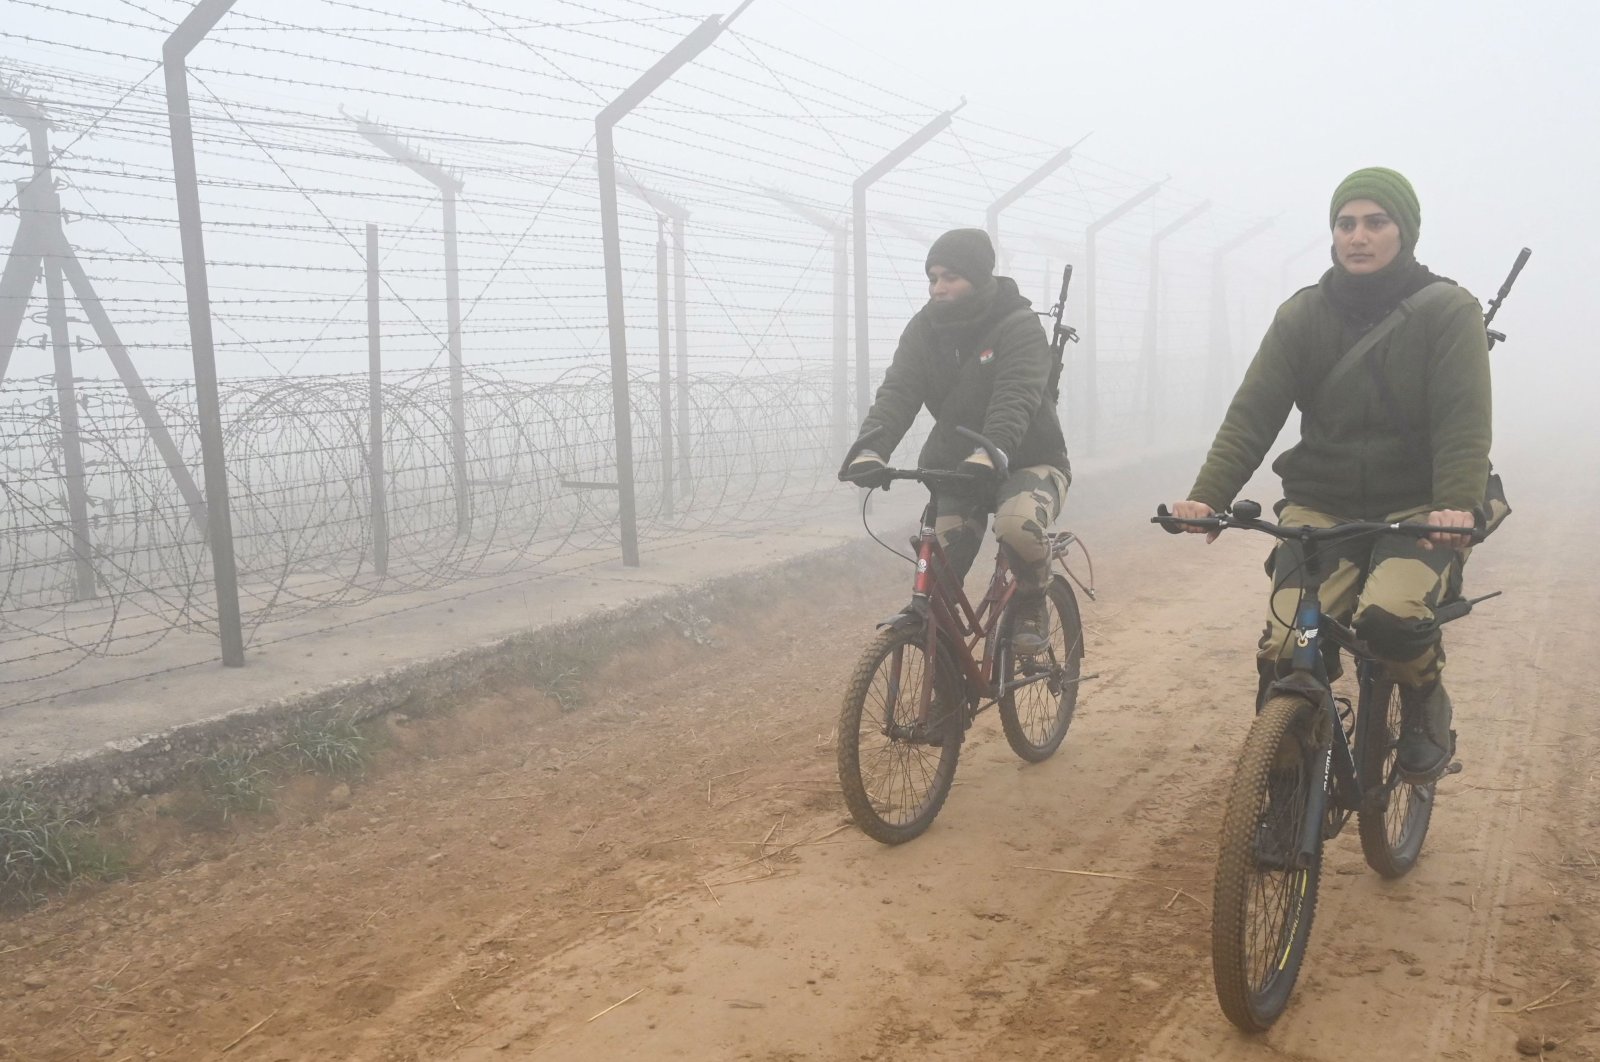 Border Security Force (BSF) personnel patrol along the border fence on bicycles during a cold foggy morning at the India-Pakistan Wagah border near Amritsar, India, Dec. 21, 2022. (AFP Photo)